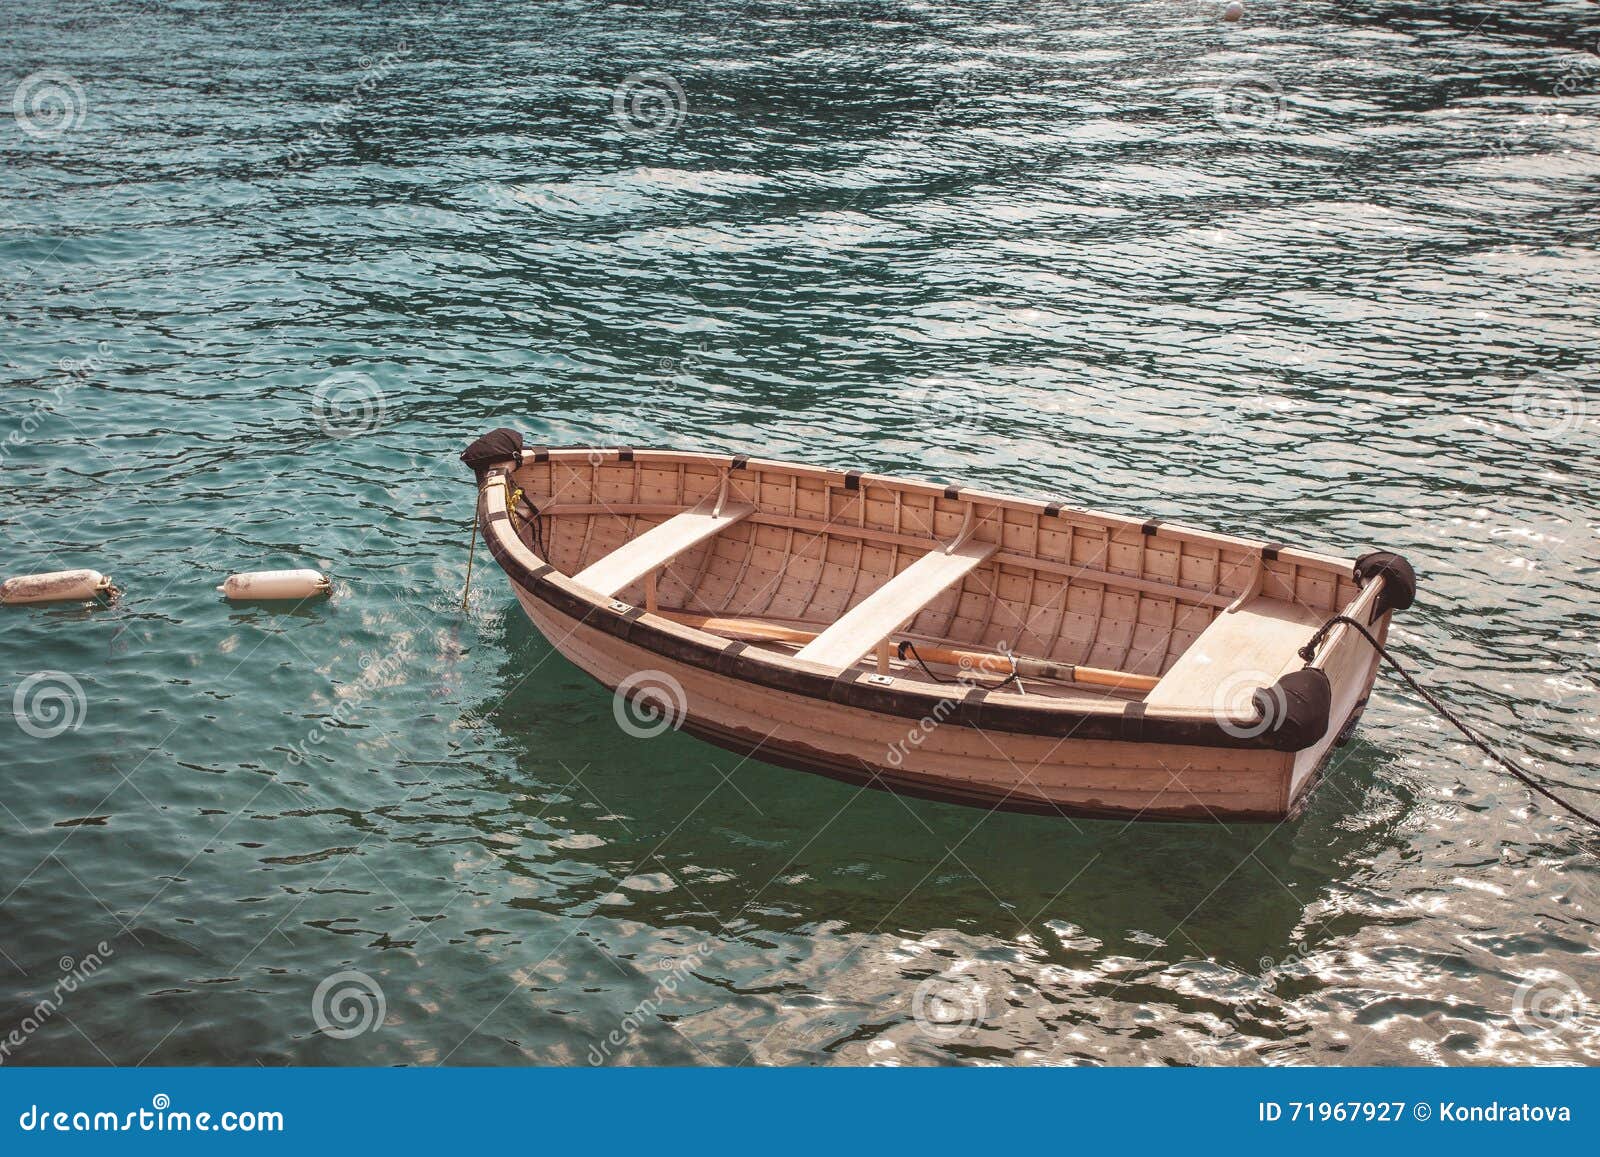 Old Wooden Fishing Boat in Turquoise Water. Stock Image - Image of